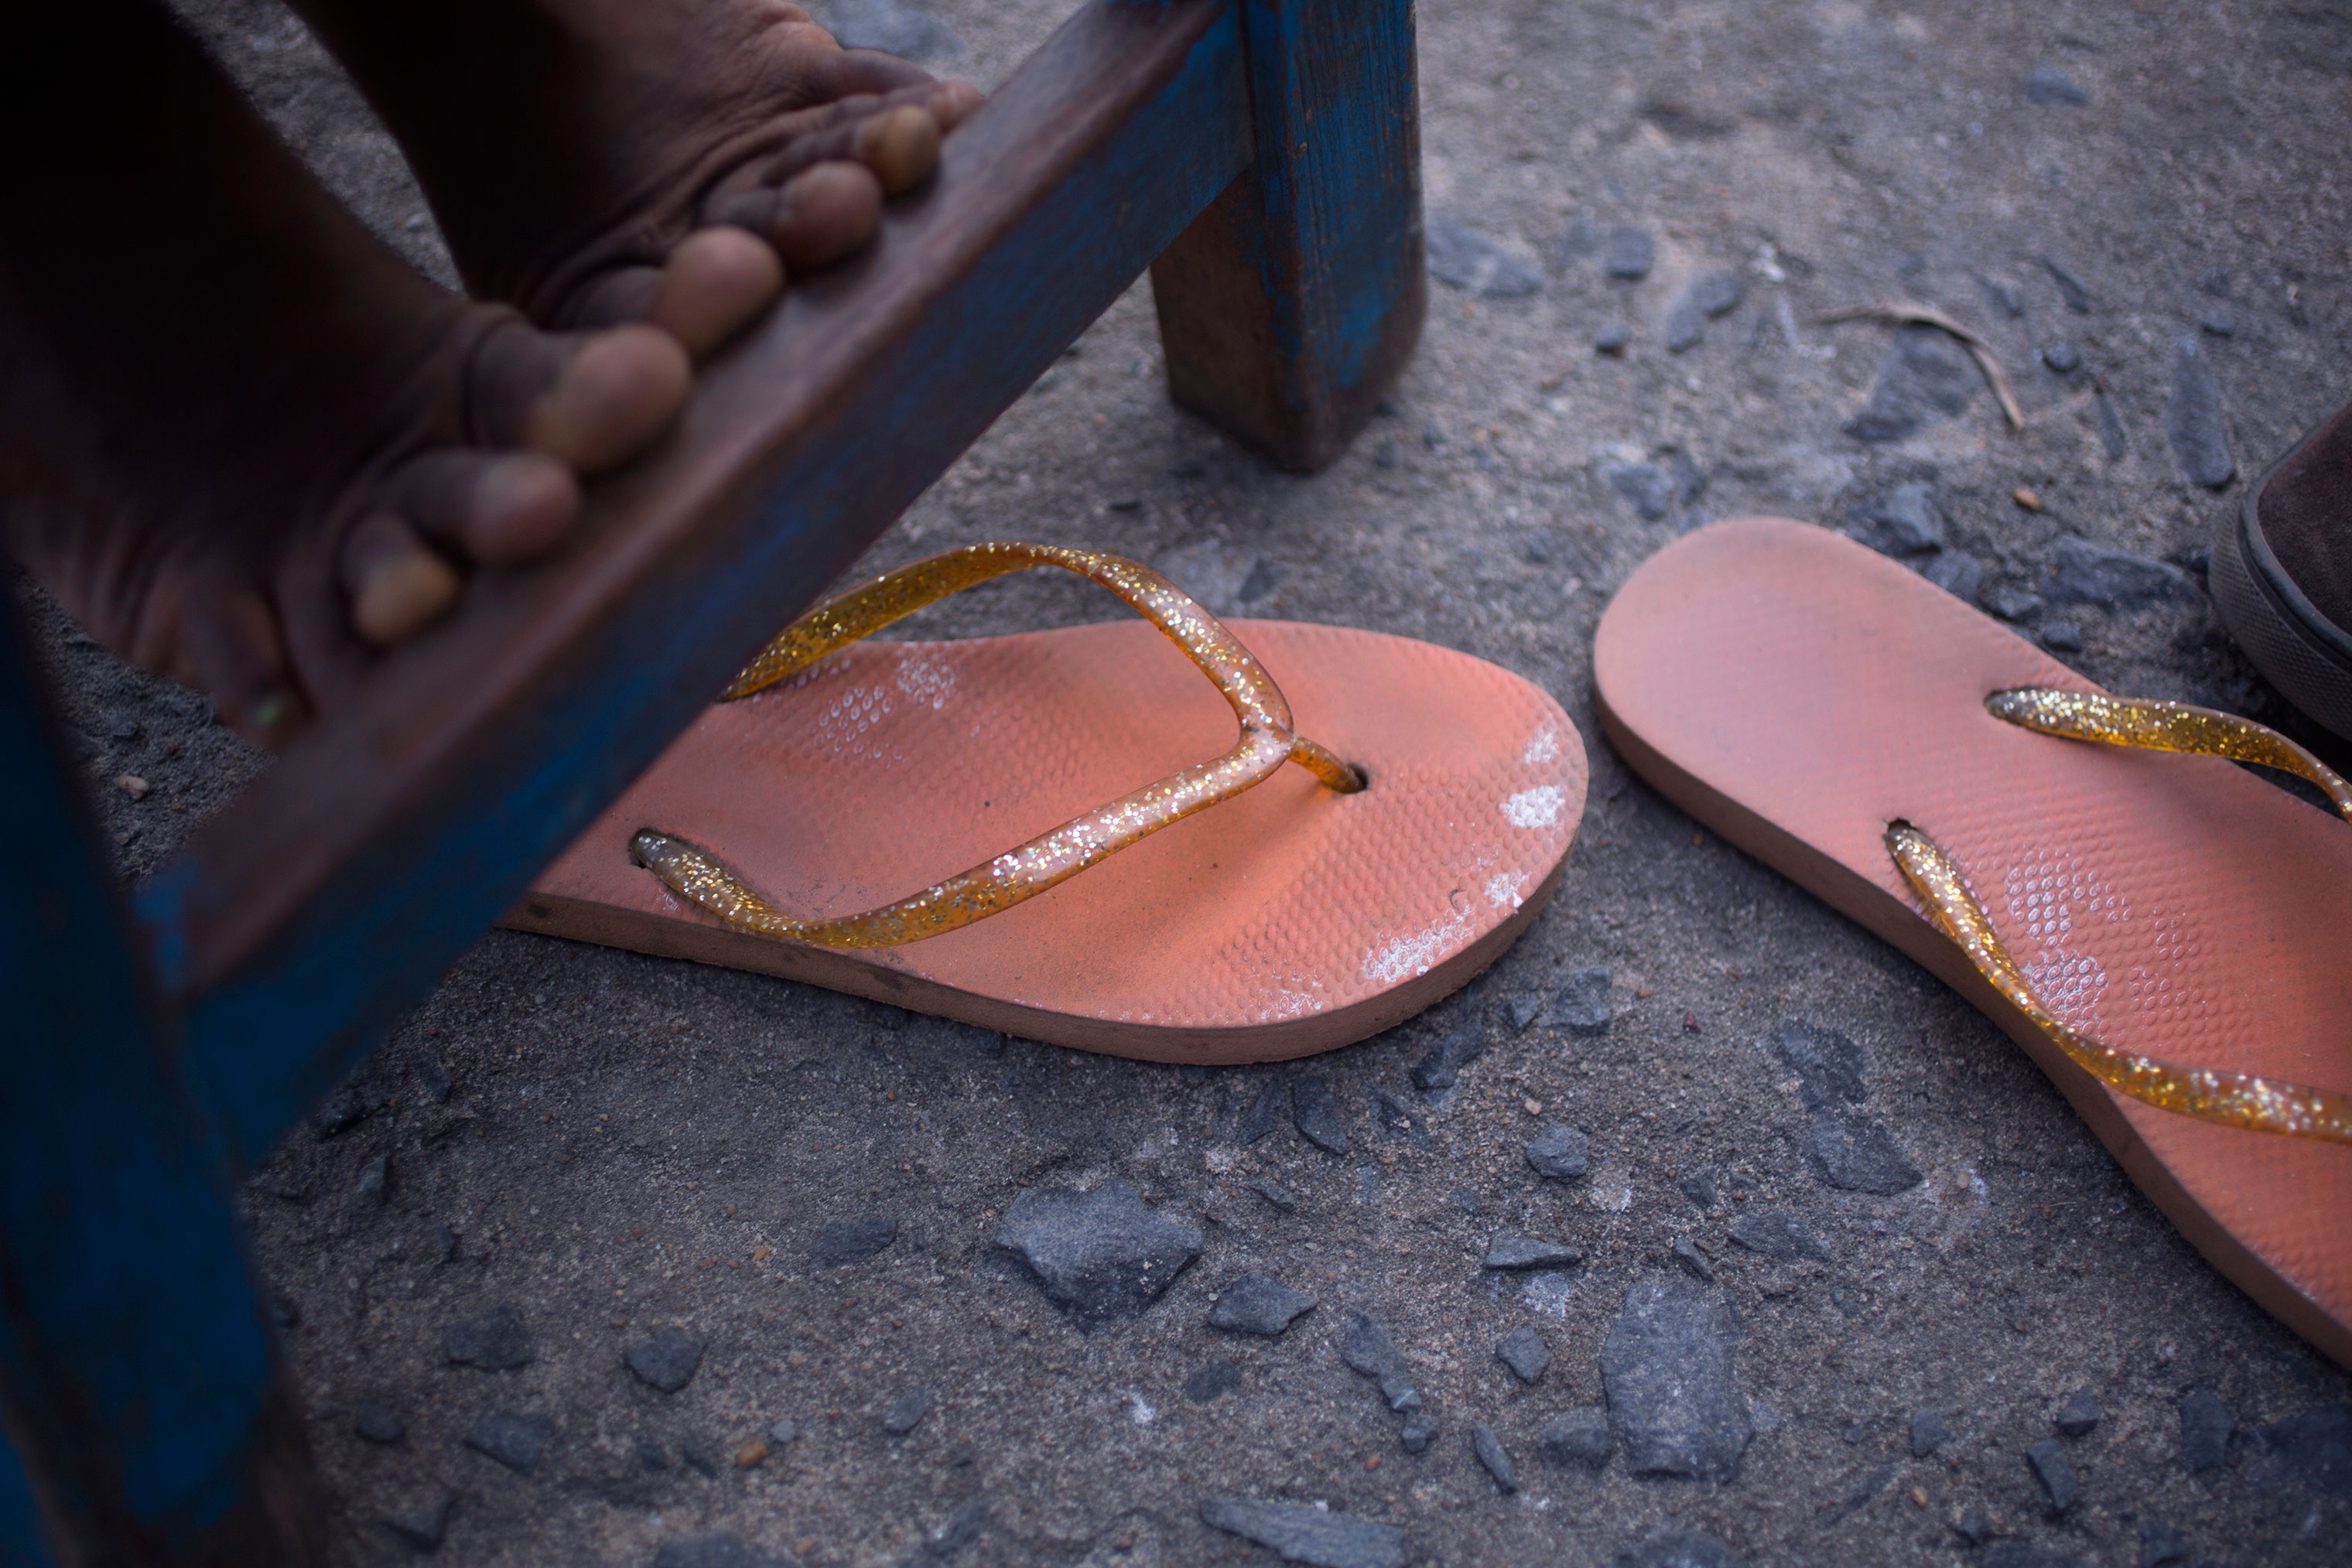 Feet of one of the girls who was in the trial. (Kathleen Flynn, special to ProPublica)